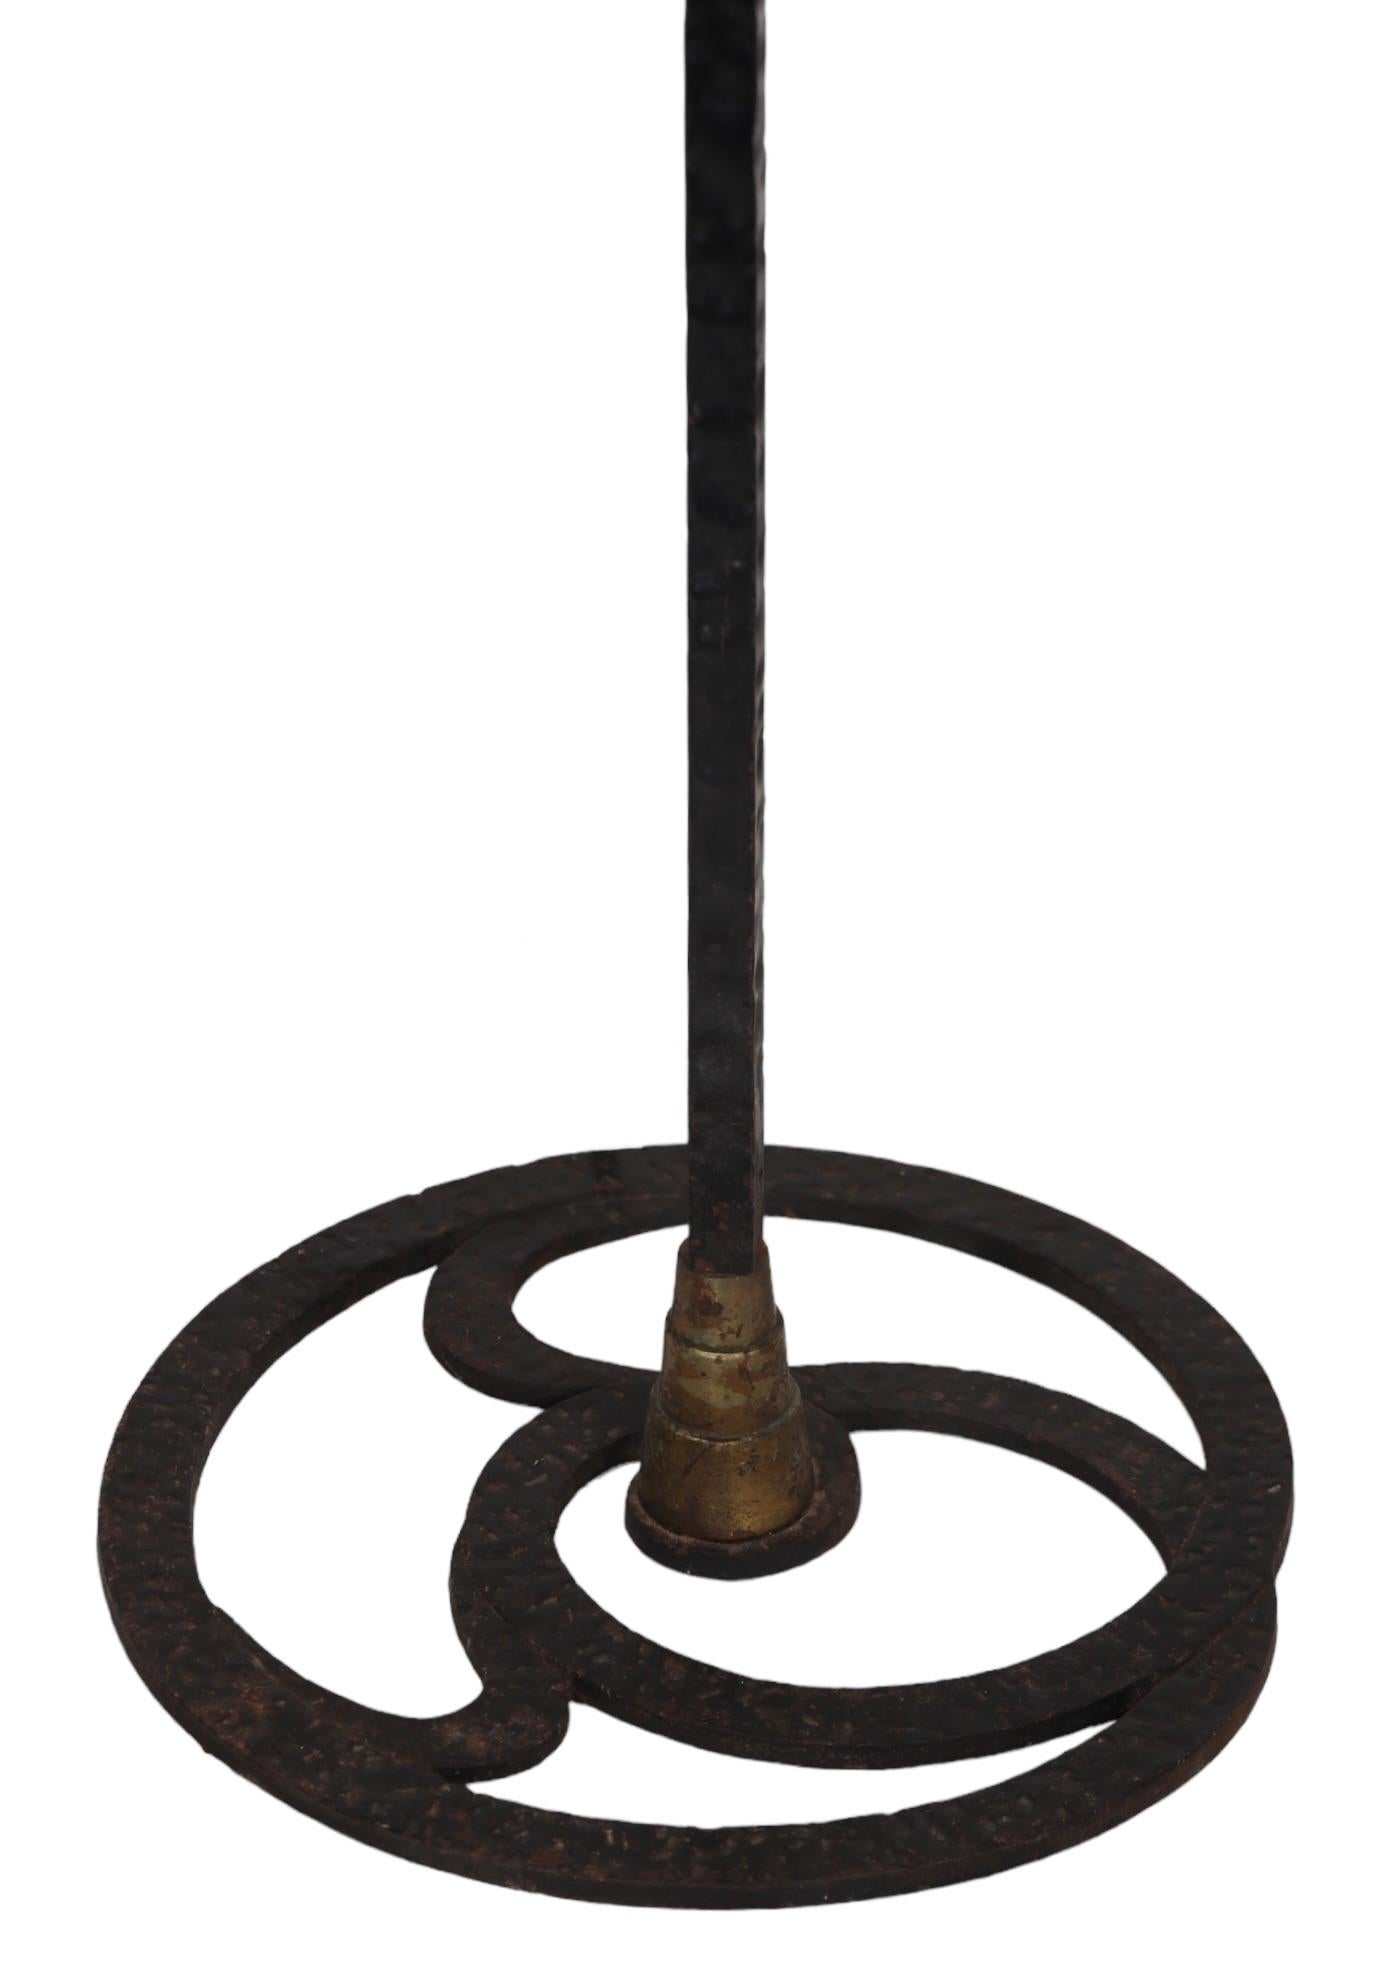  Art Deco Wrought Iron and Brass Floor lamp after Brandt, Bach c. 1920/1930's For Sale 5